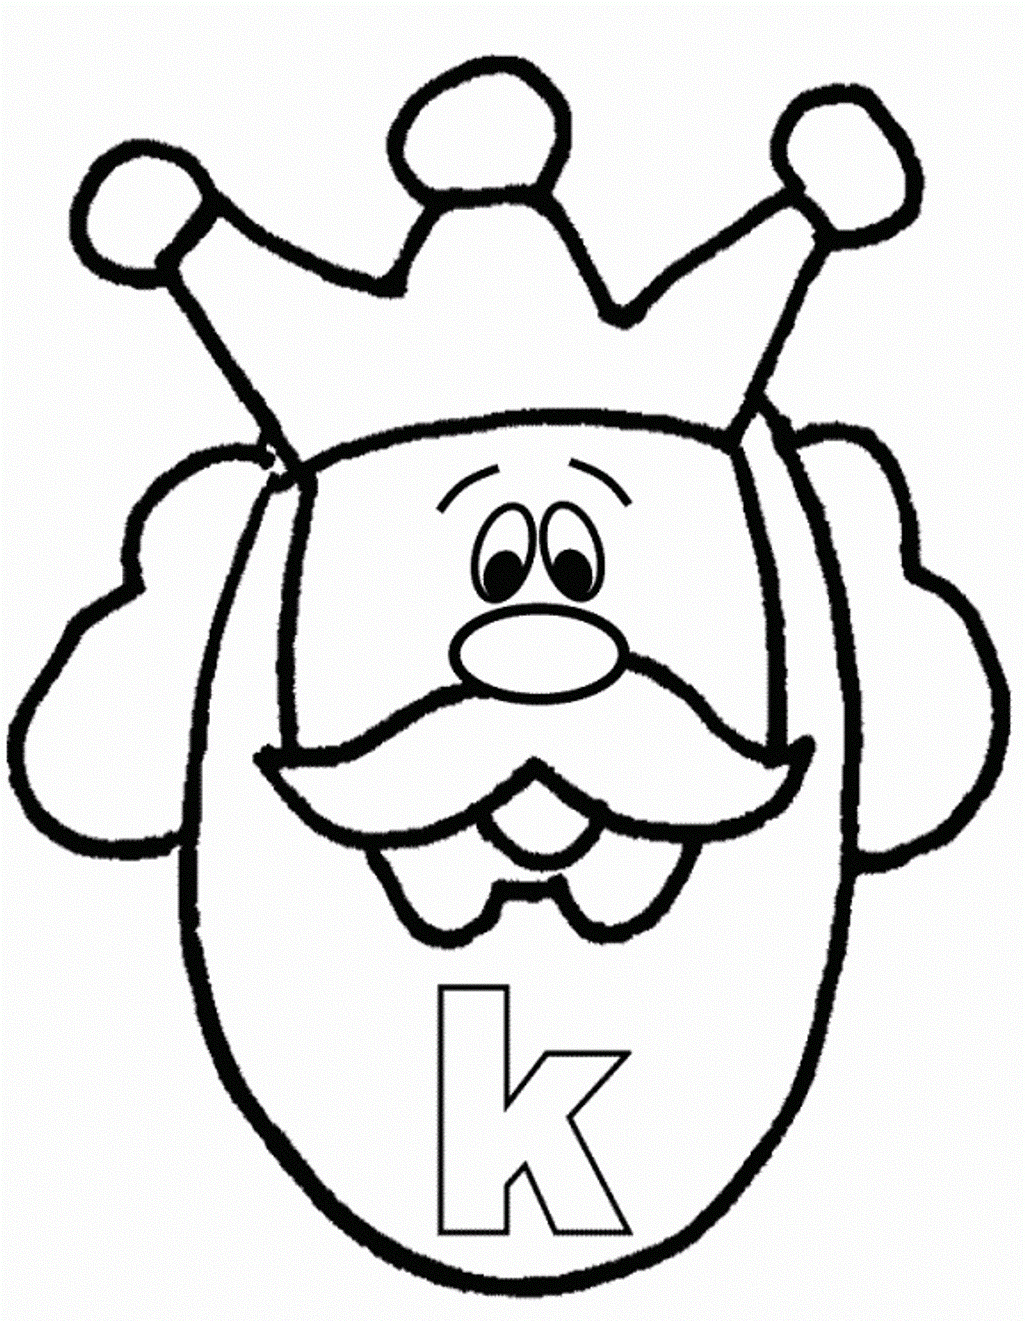 Alphabet Coloring Pages Free King Word | Alphabet Coloring pages ...